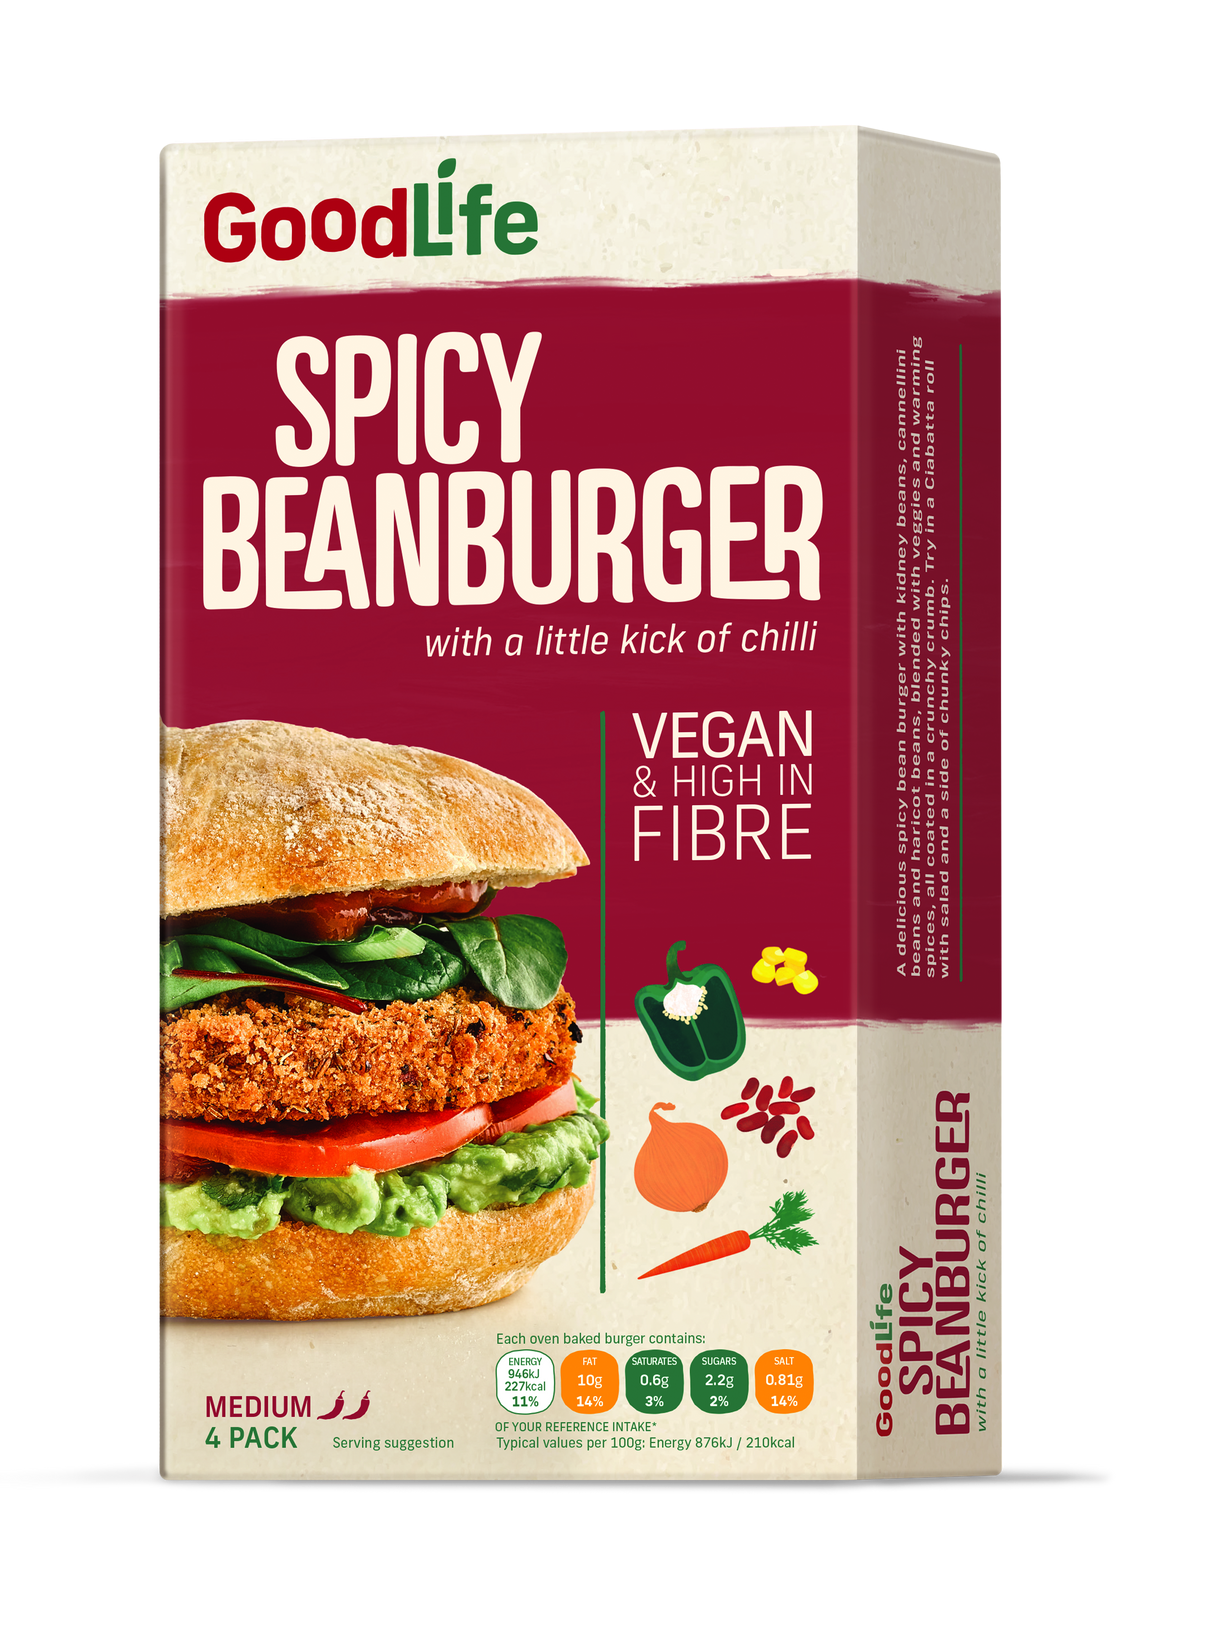 Healthy midweek meals from GoodLife - Beanburger